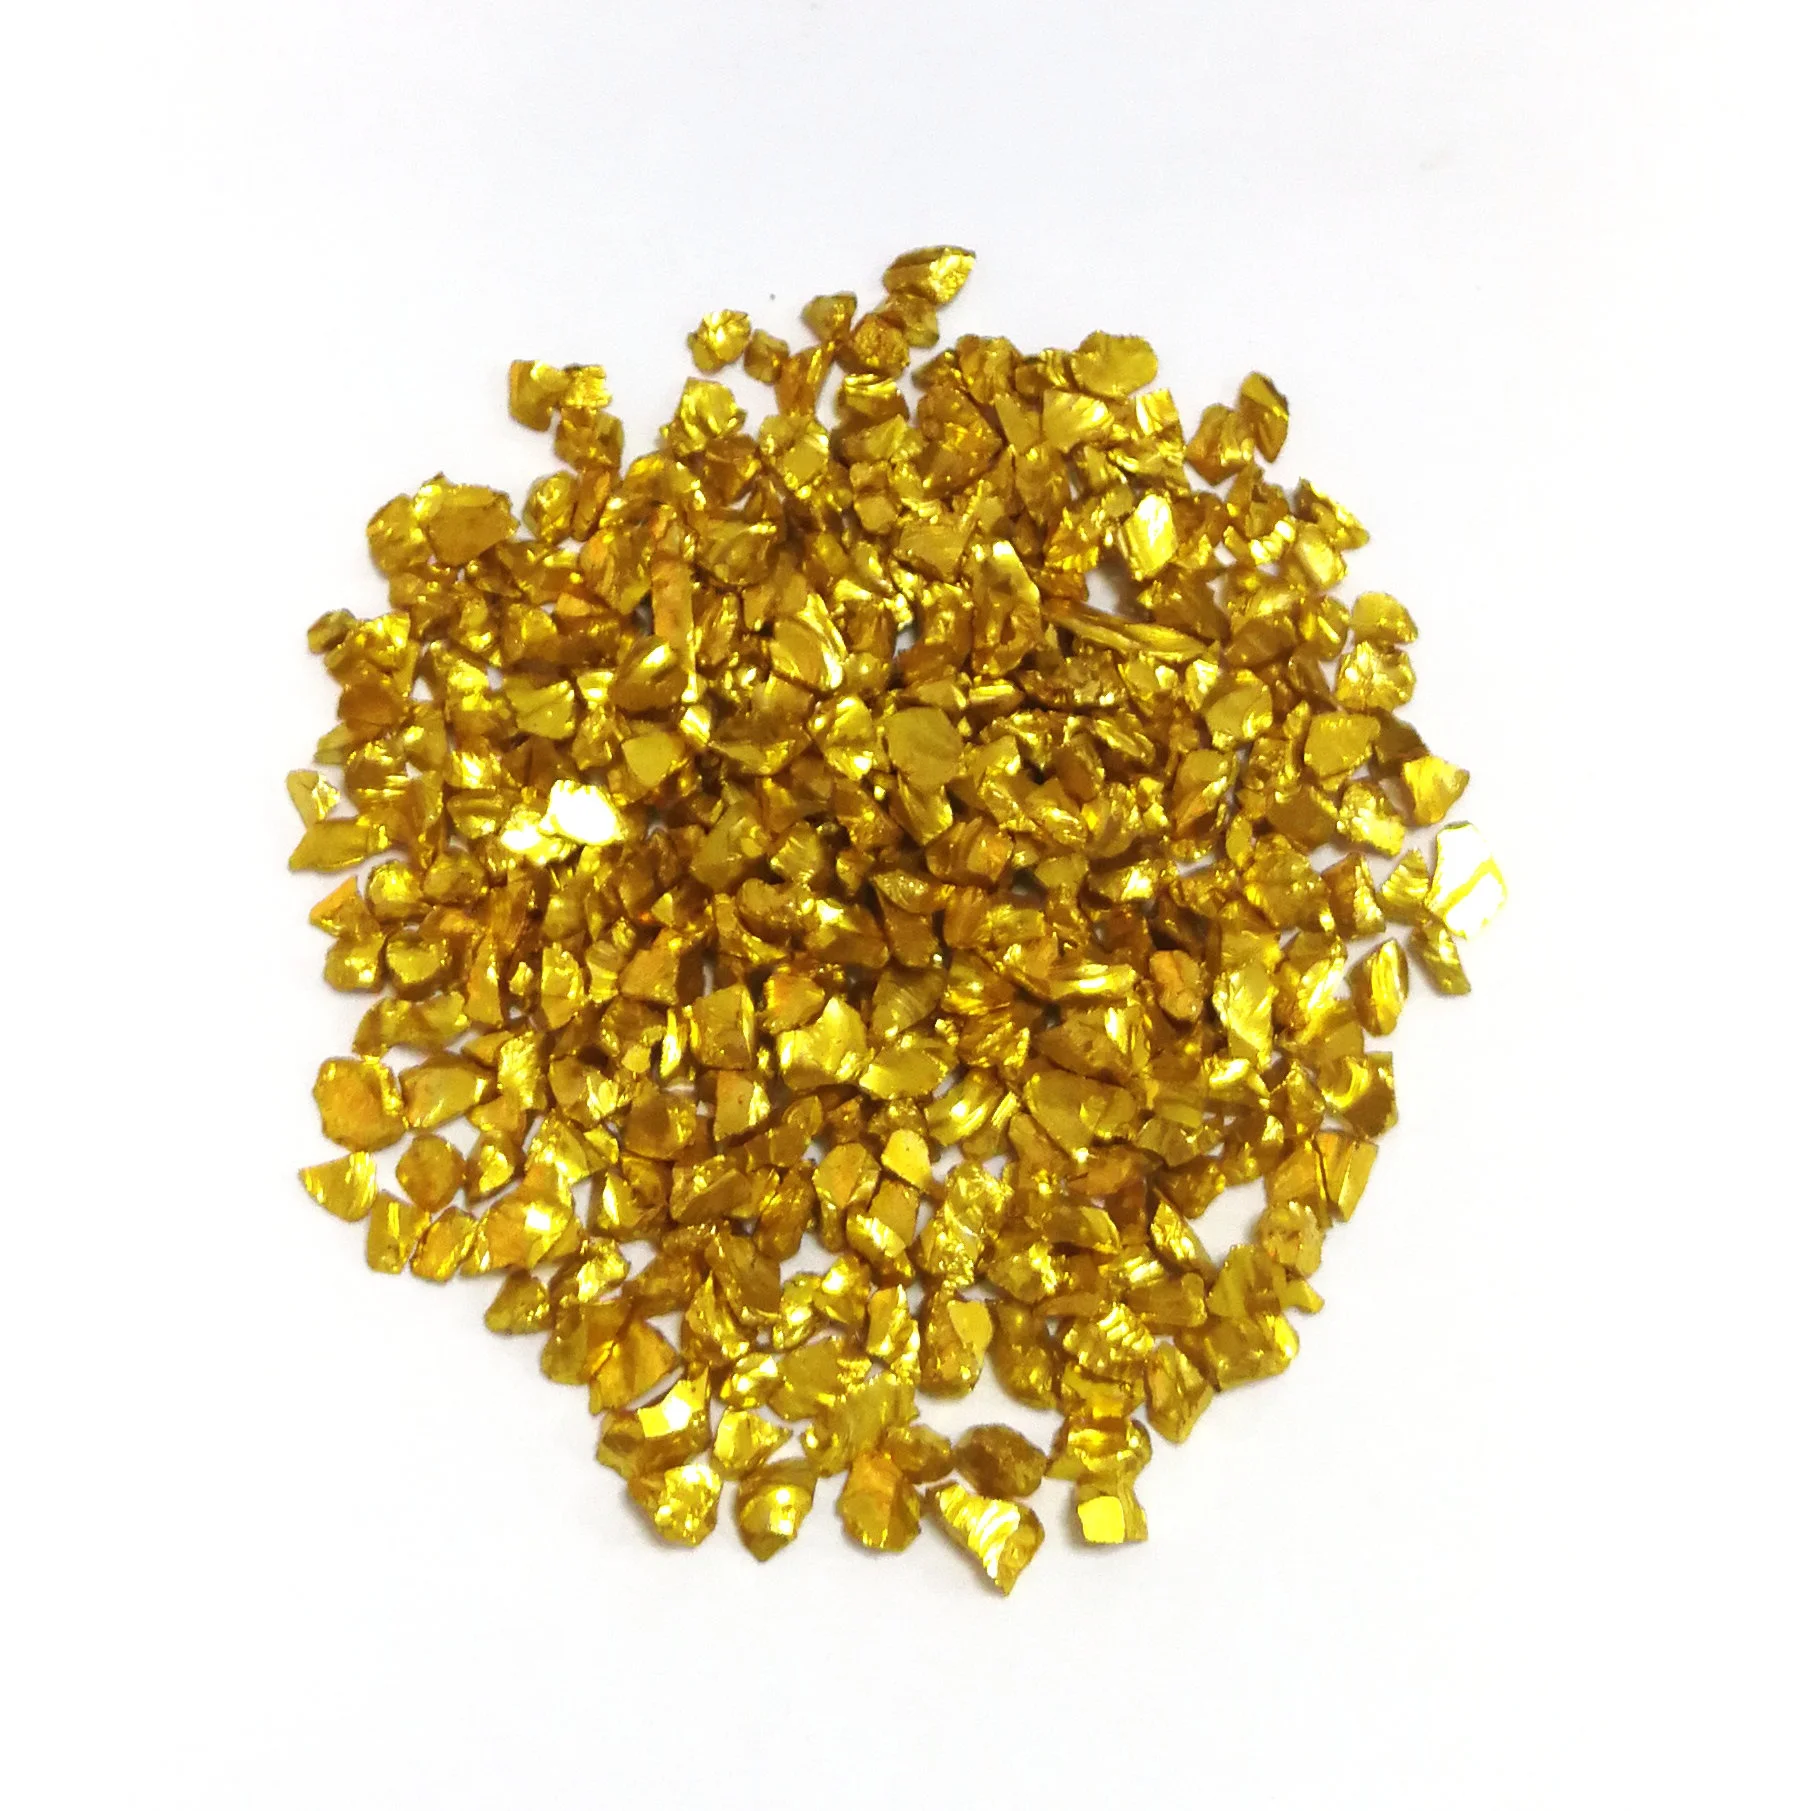 Gold-plated colorful crushed glass for crafts terrazzo